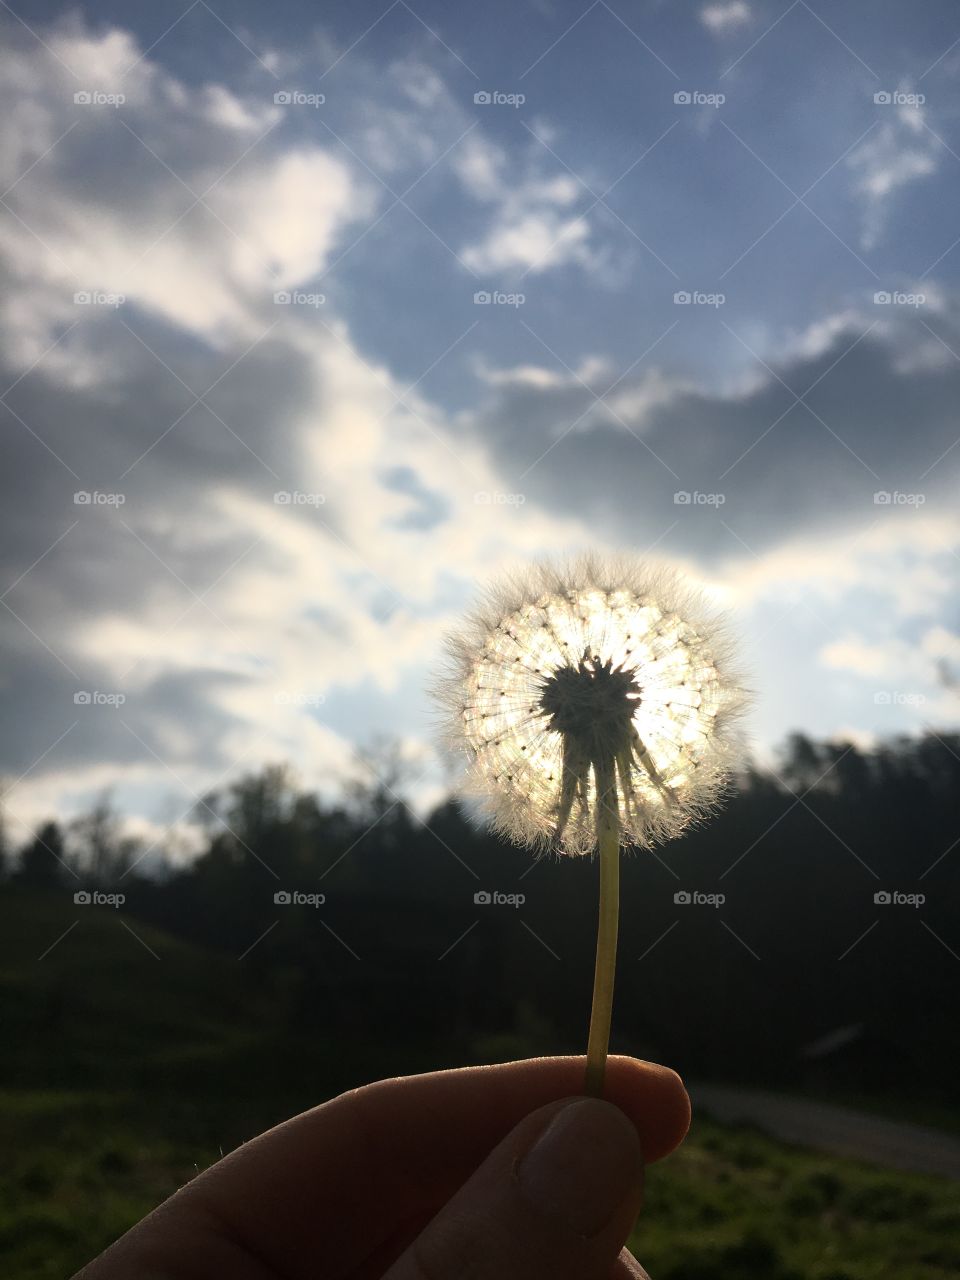 I was mowing this morning and the sky was absolutely gorgeous! Here’s a dandelion to brighten your day!